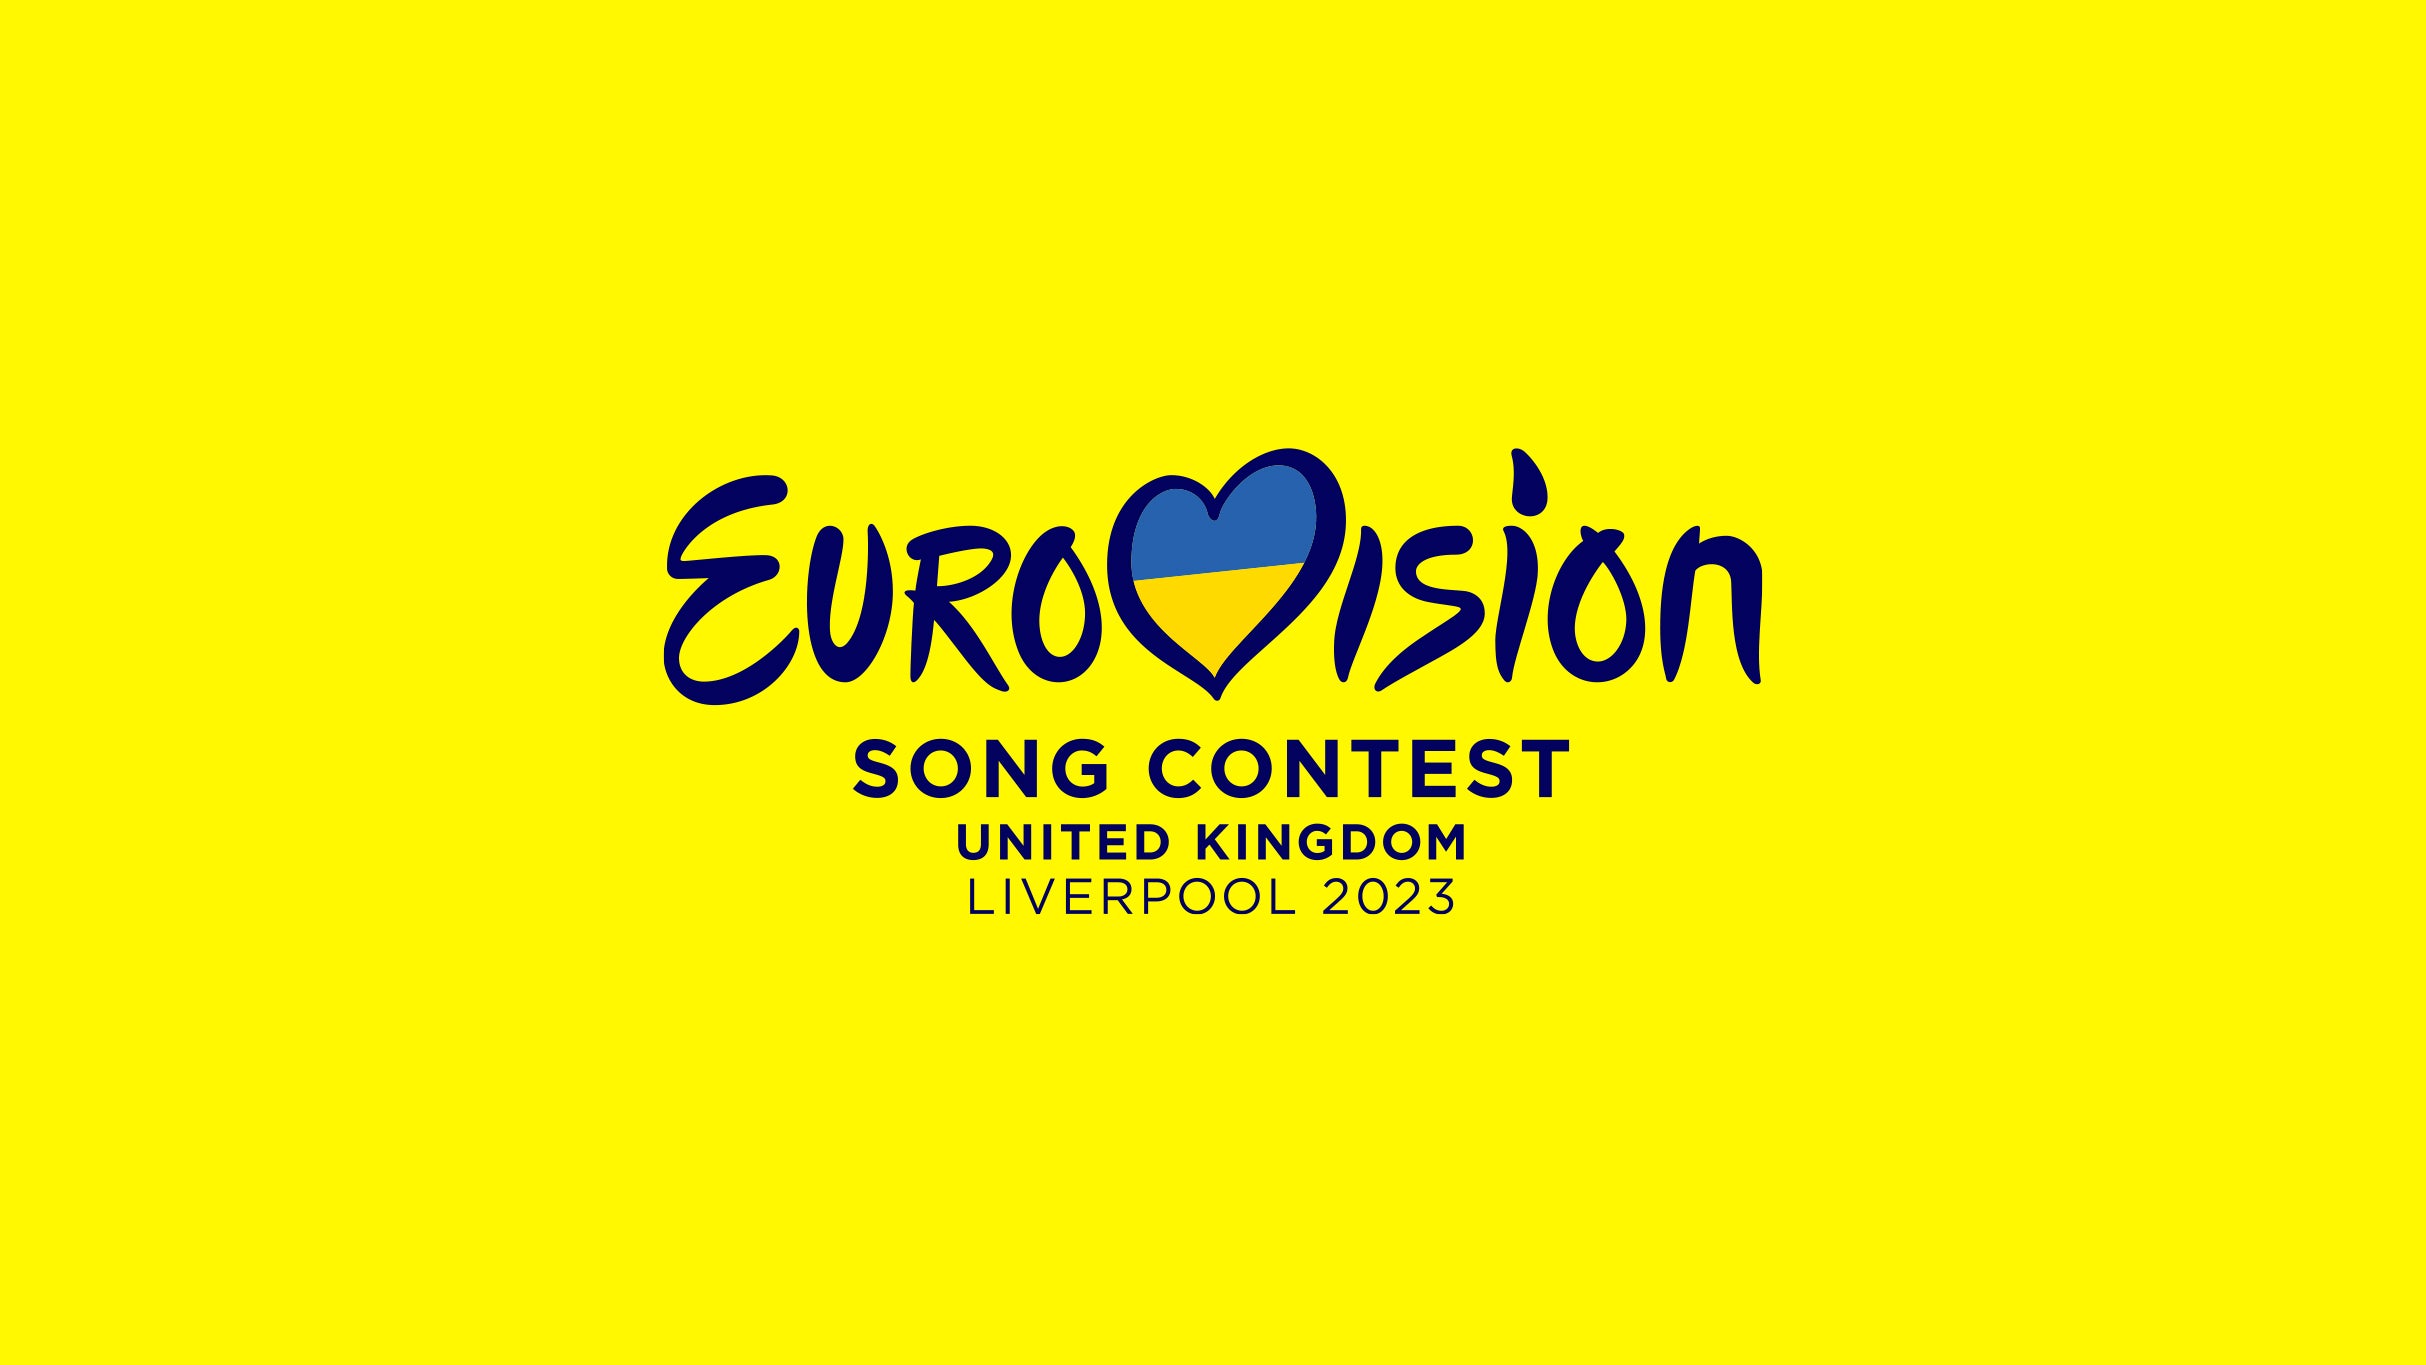 Eurovision Song Contest Semi Final 1 - Afternoon Preview